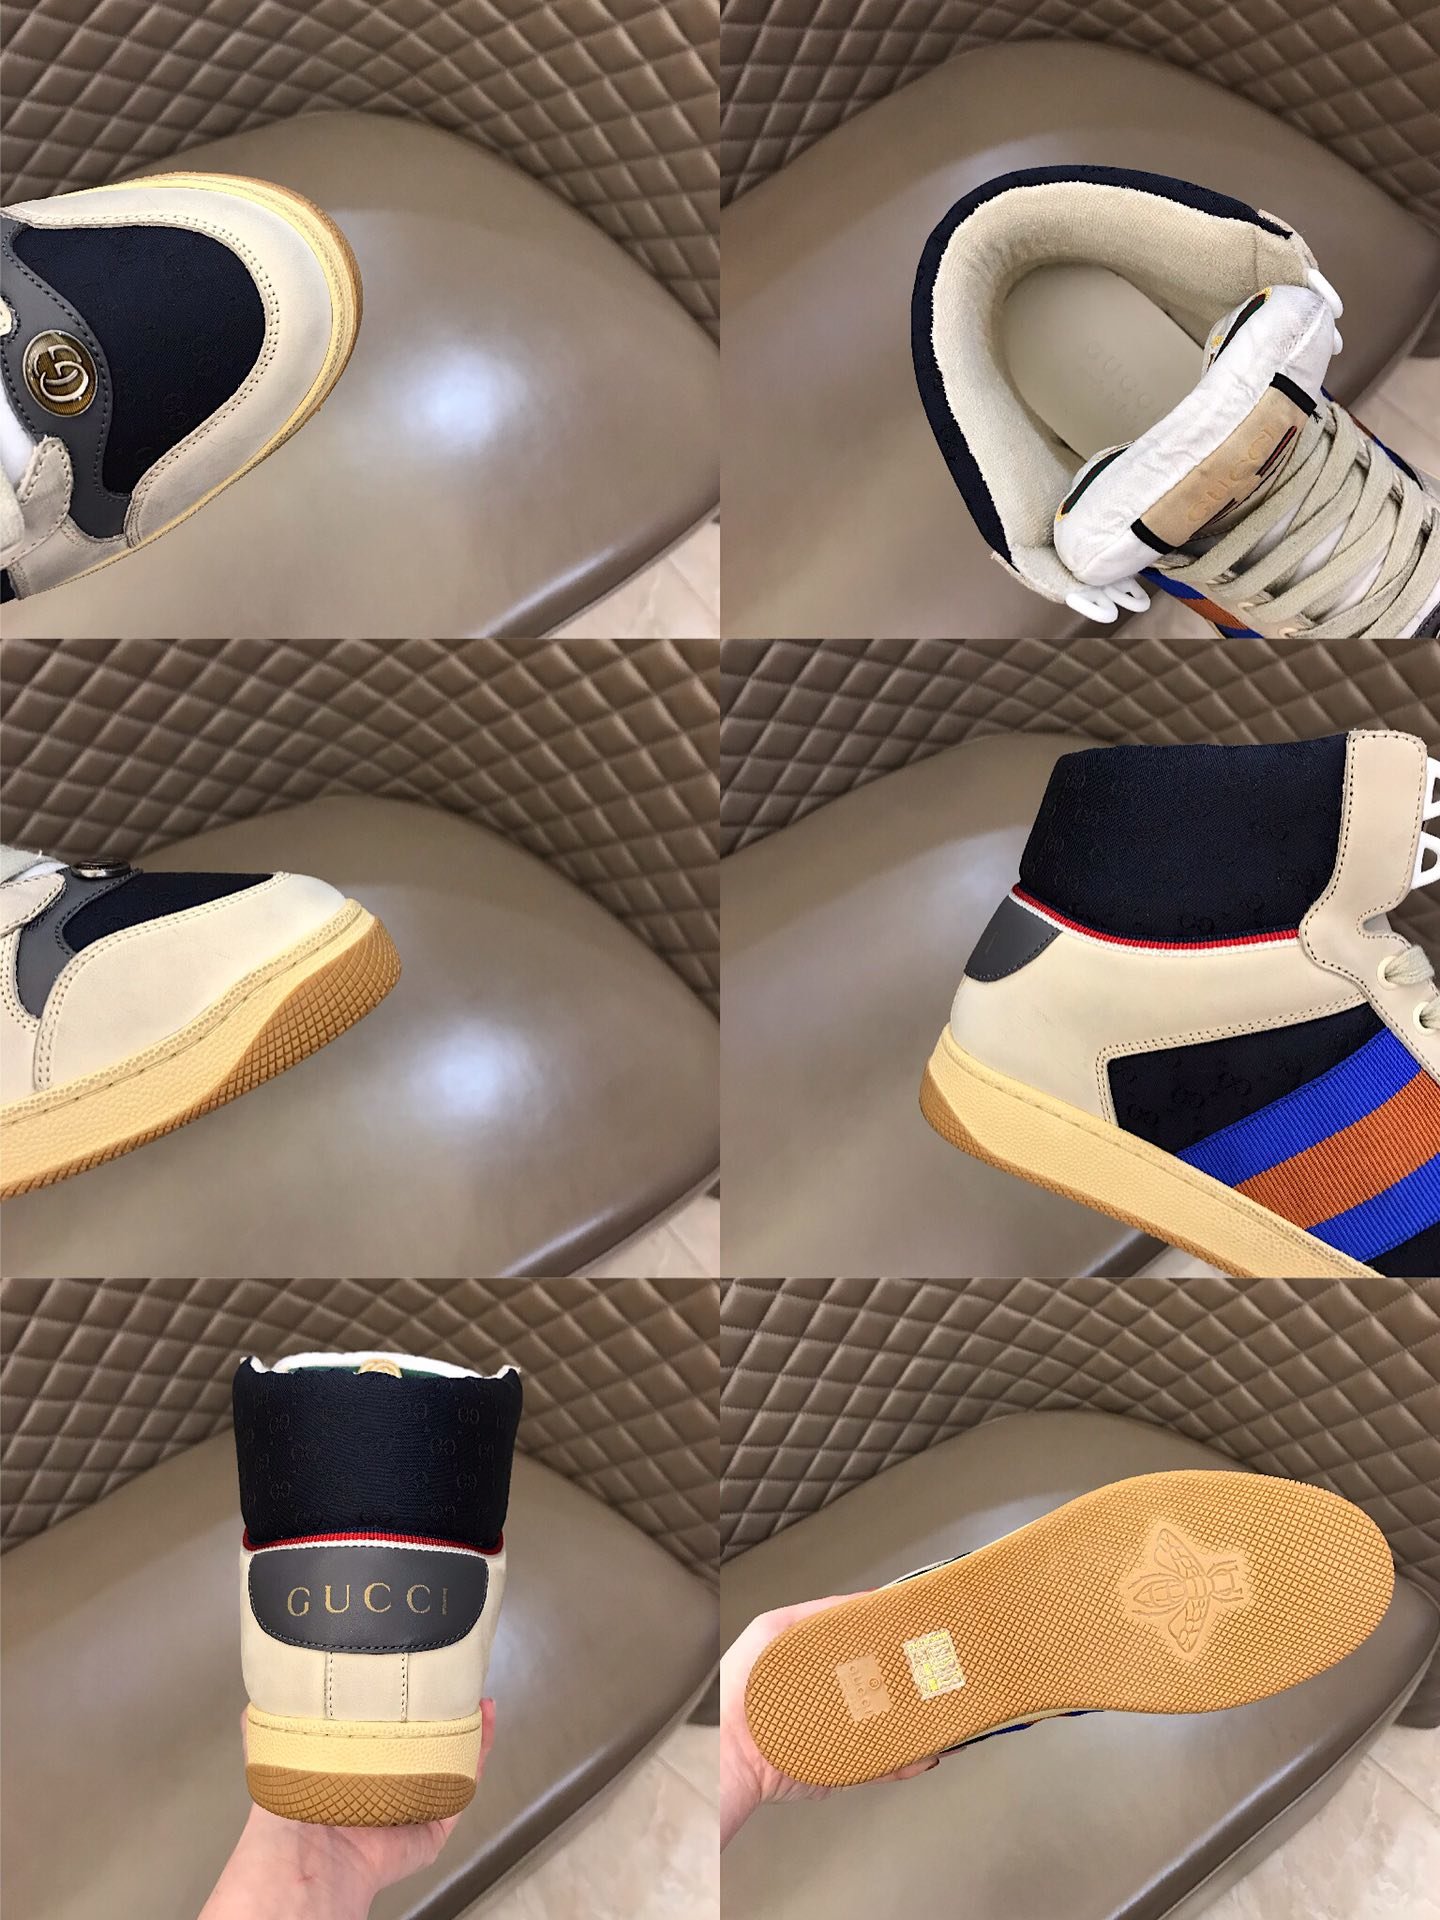 Gucci High-top High Quality Sneakers Beige and black details with beige sole MS021154